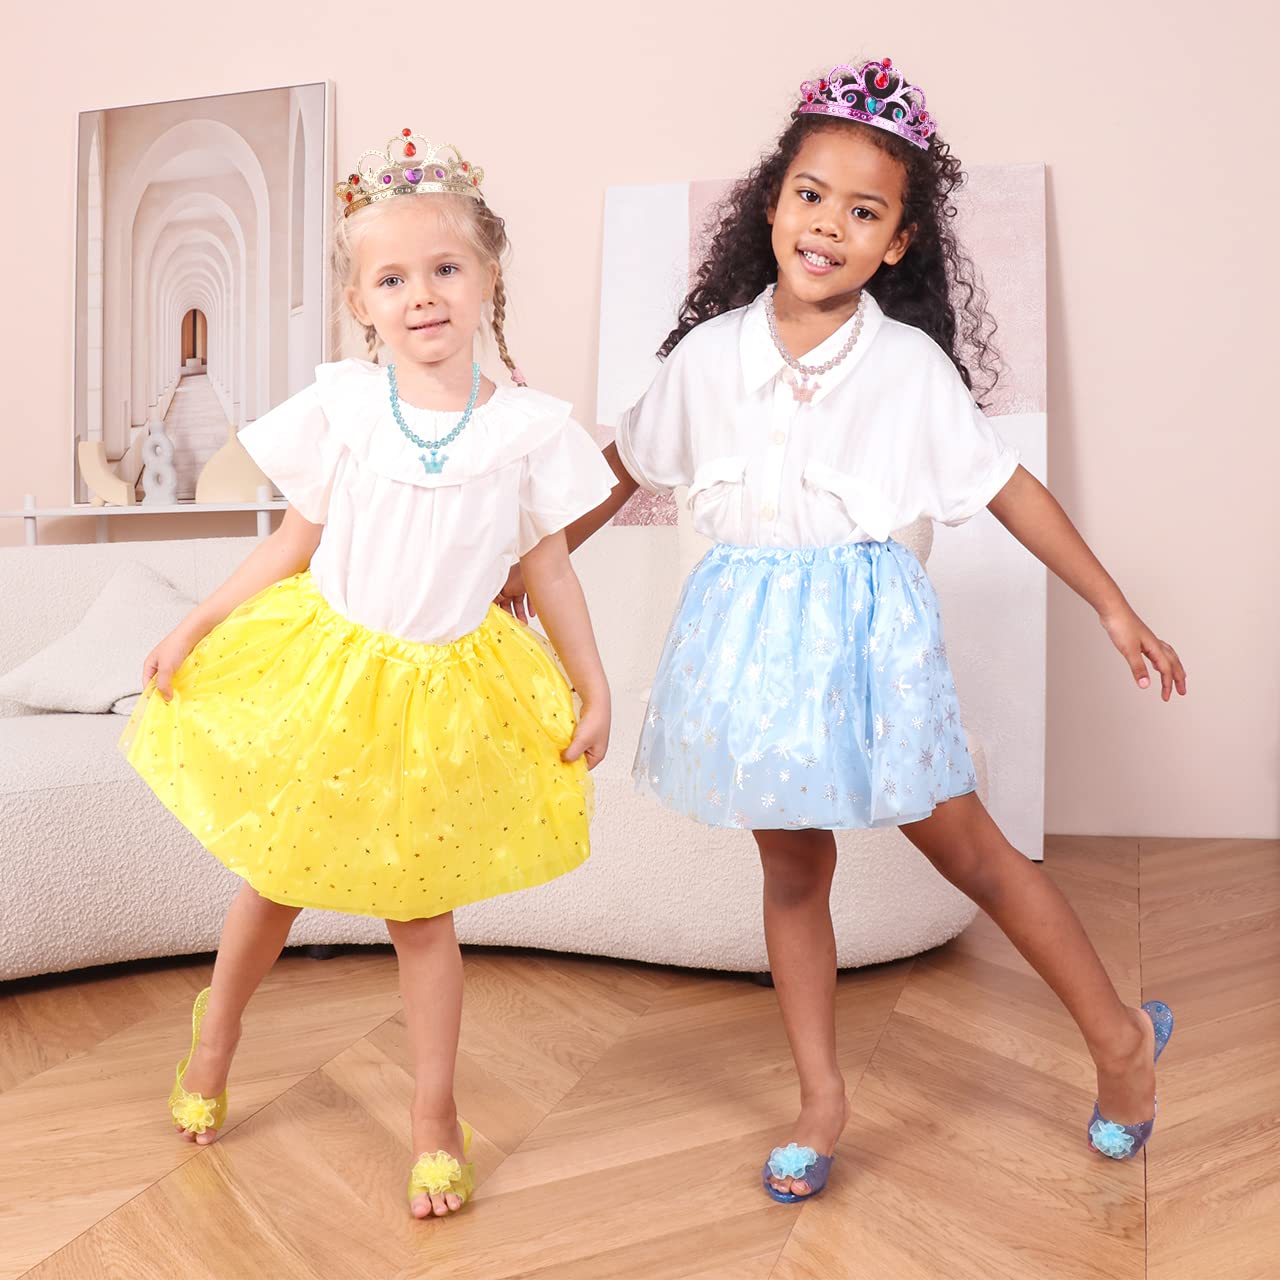 Meland Princess Dress Up - Dress Up Clothes for Little Girls - Kids Dress Up & Pretend Play with 3 Skirts, 3 Pairs of Princess Shoes, 3 Tiaras, Jewelry - Princess Toys for Girls Age 3,4,5,6 Year Old